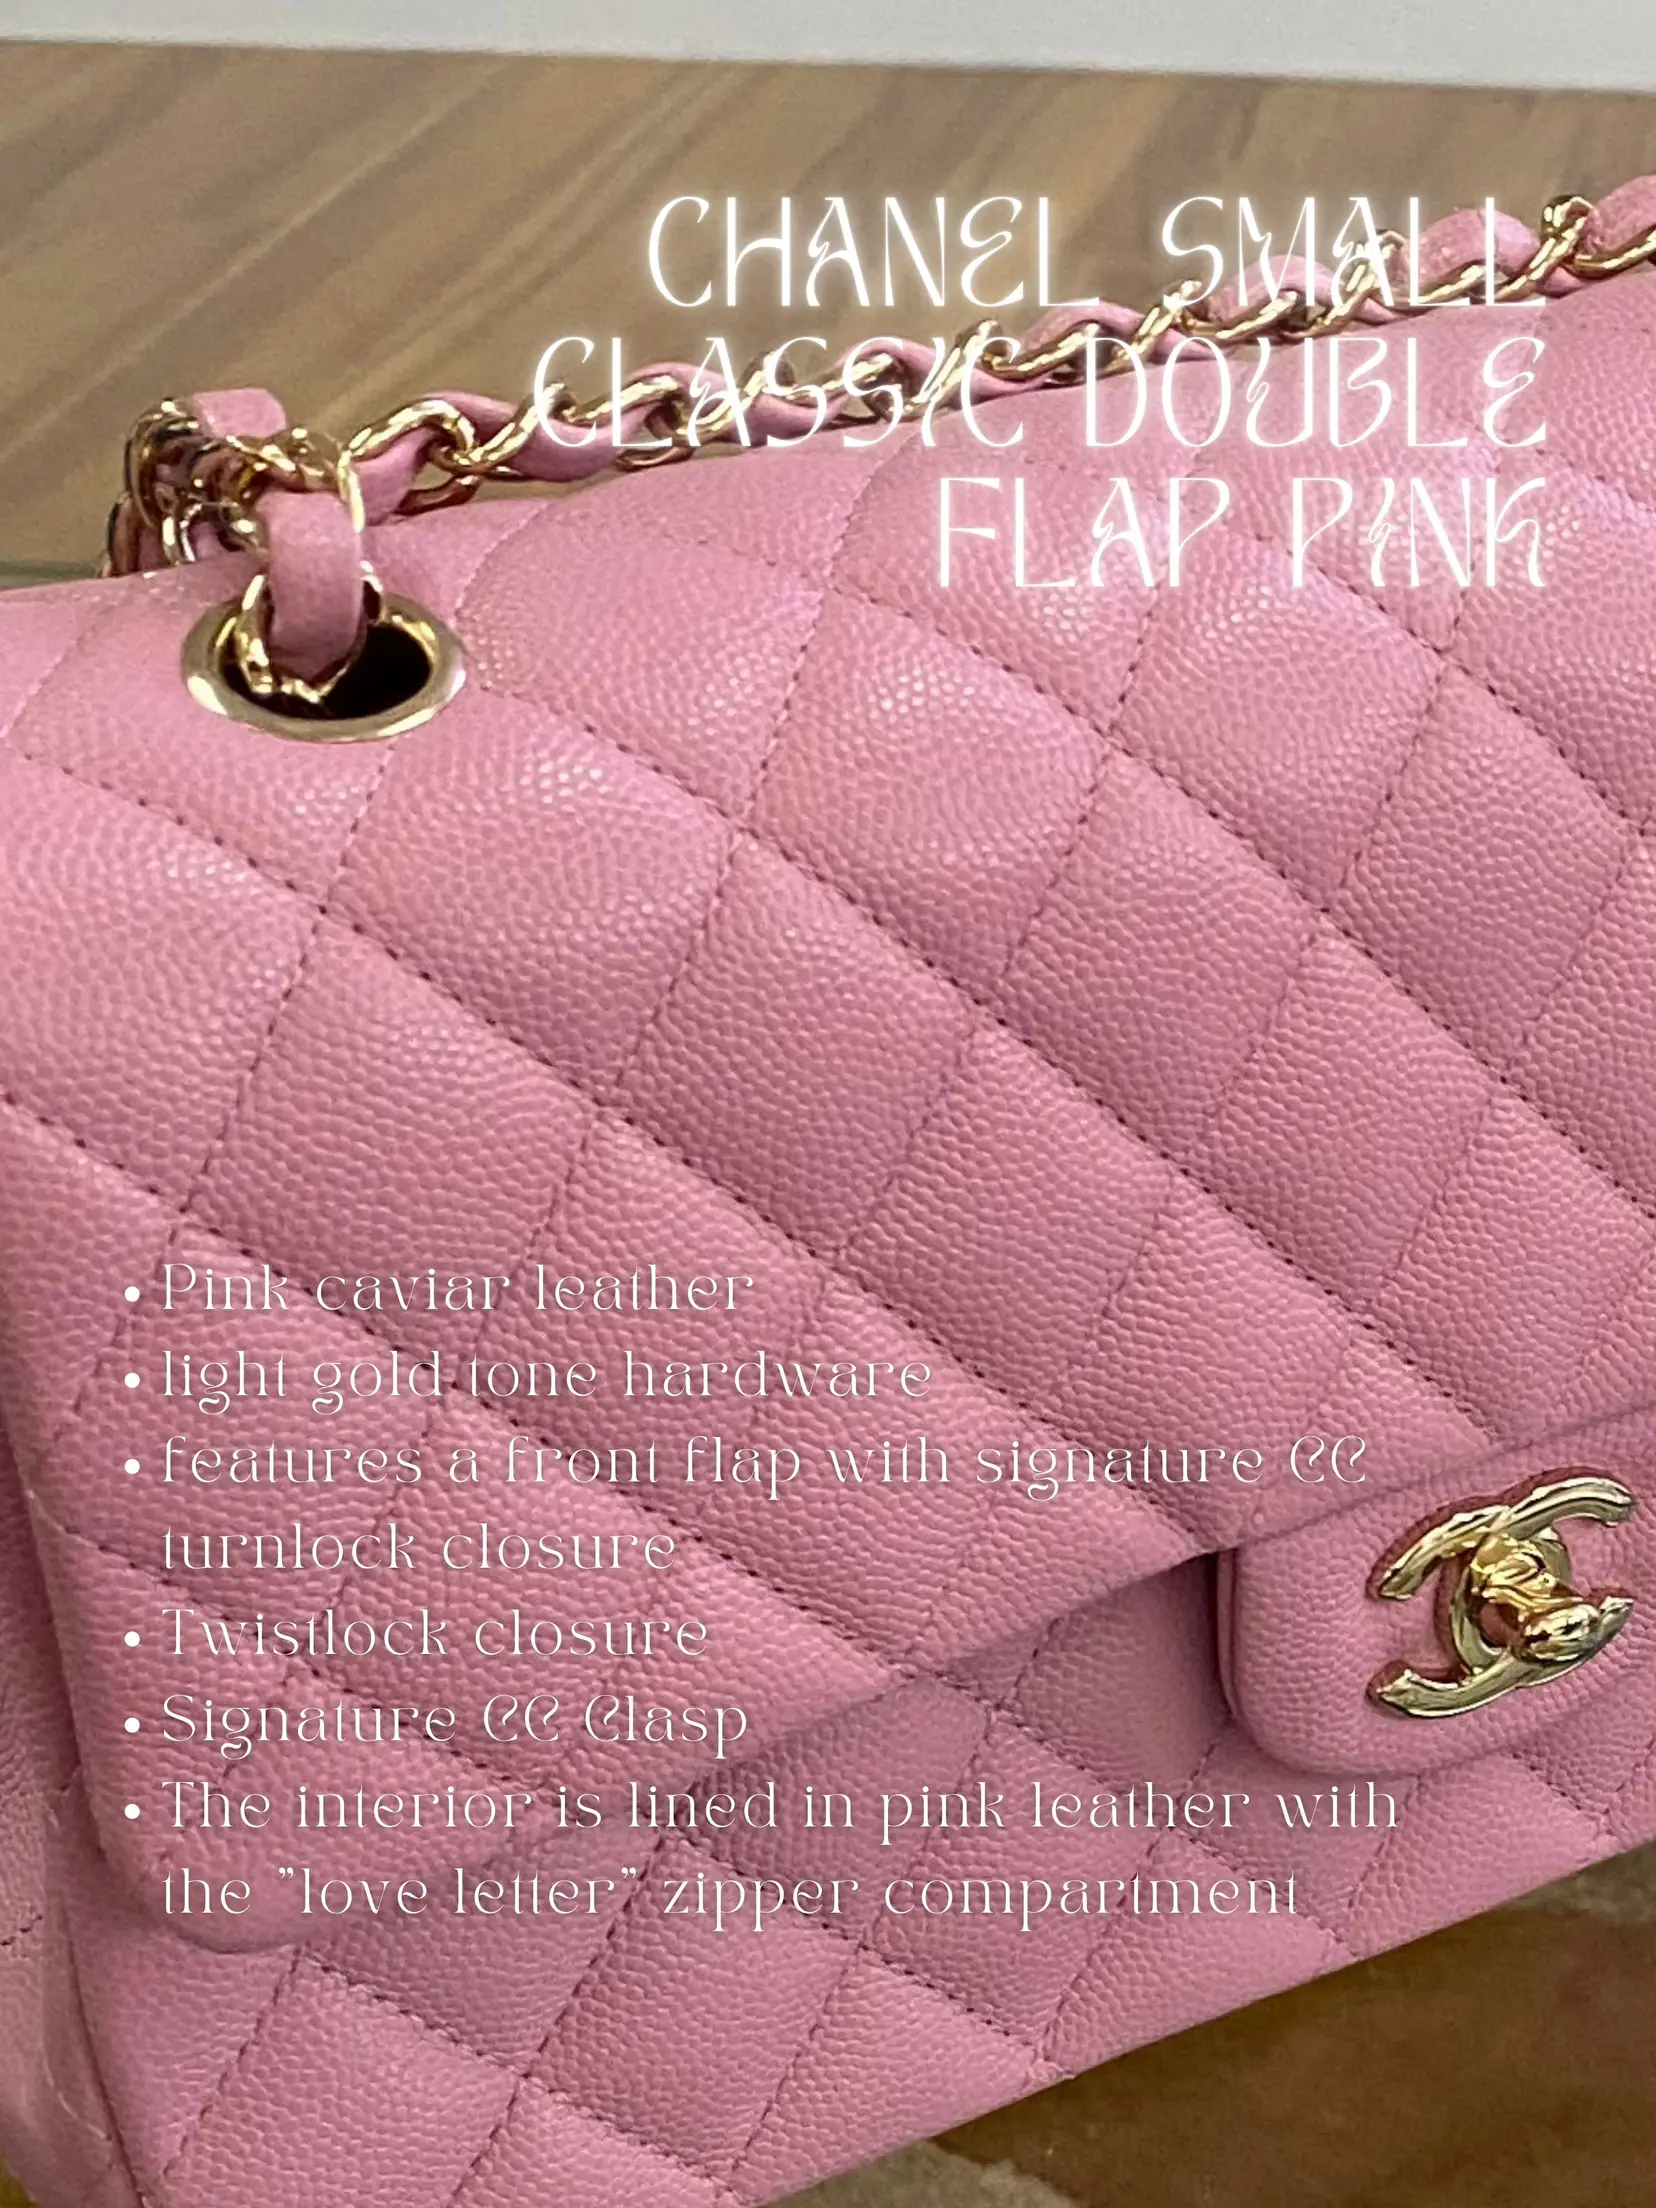 Cotton Candy Chic: Chanel Bags!, Gallery posted by Natasshanjani